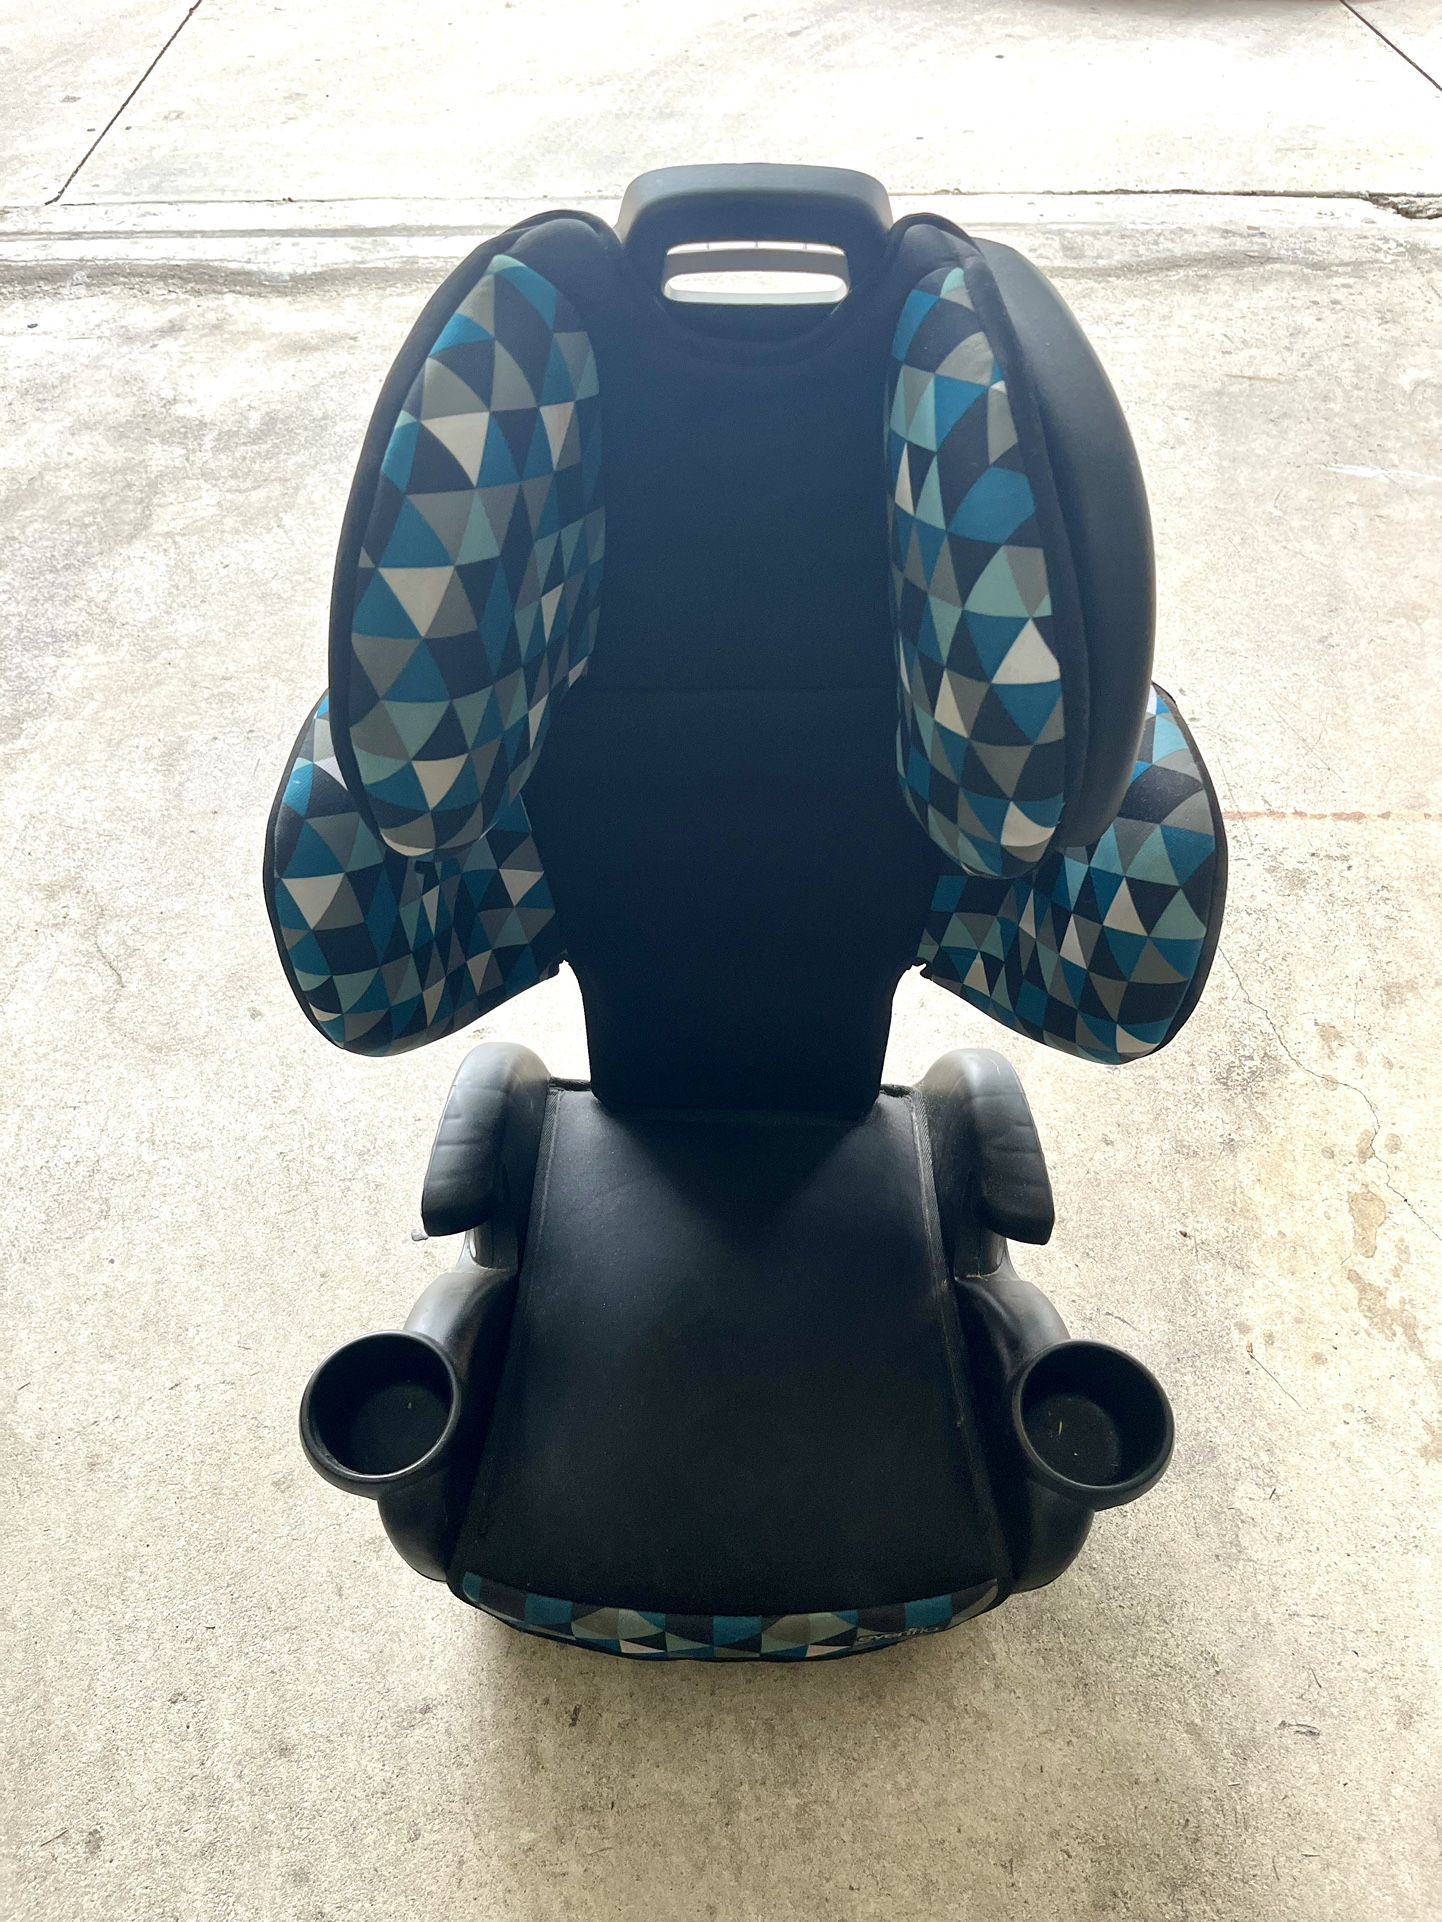 EvenFlow Booster car Seat